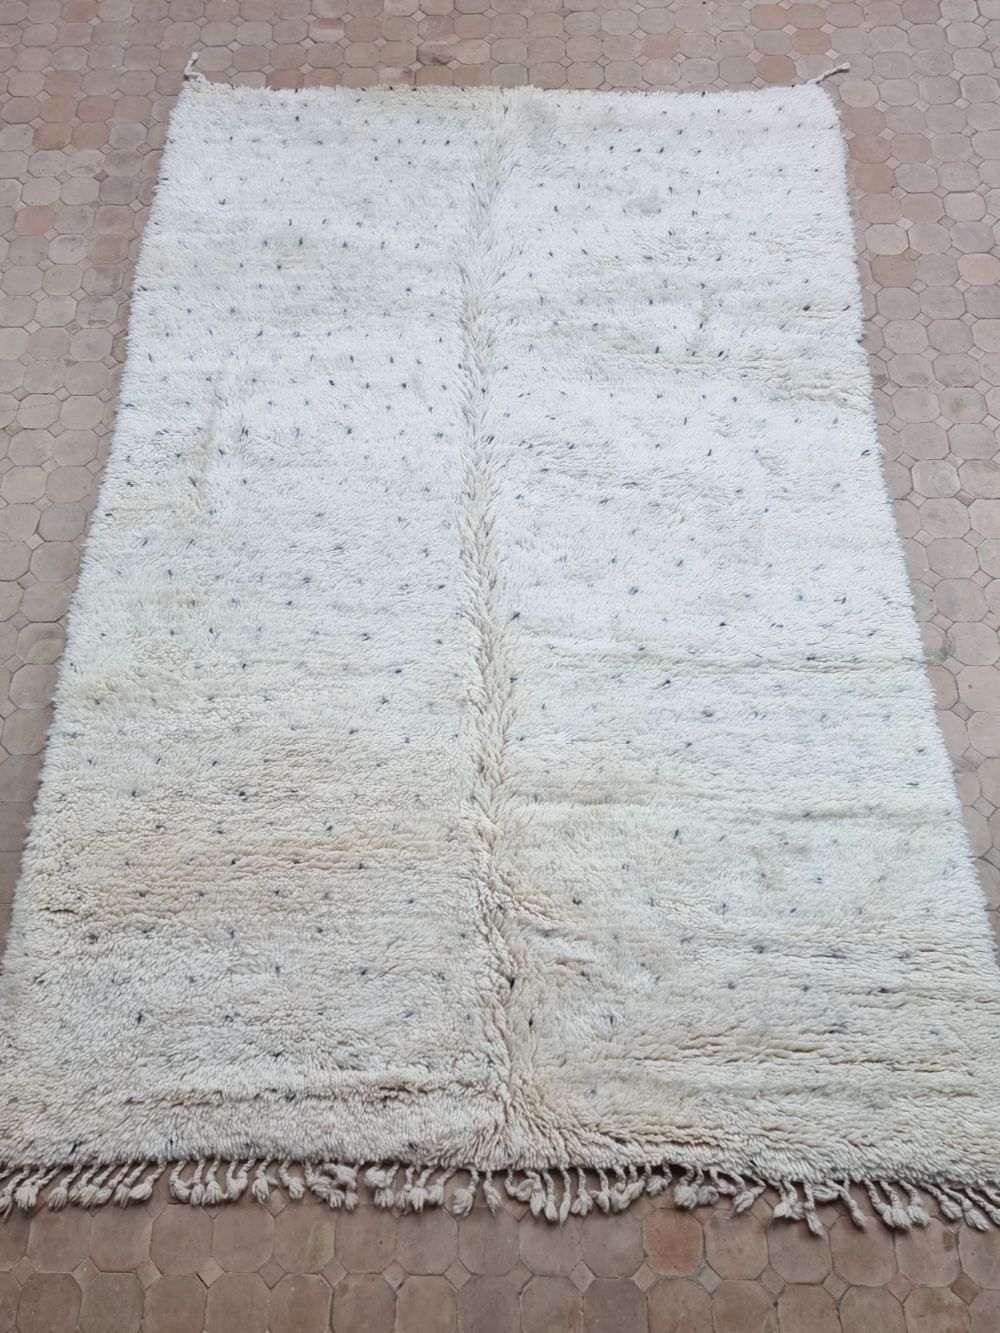 Moroccan Dotted Rug 255x170cm